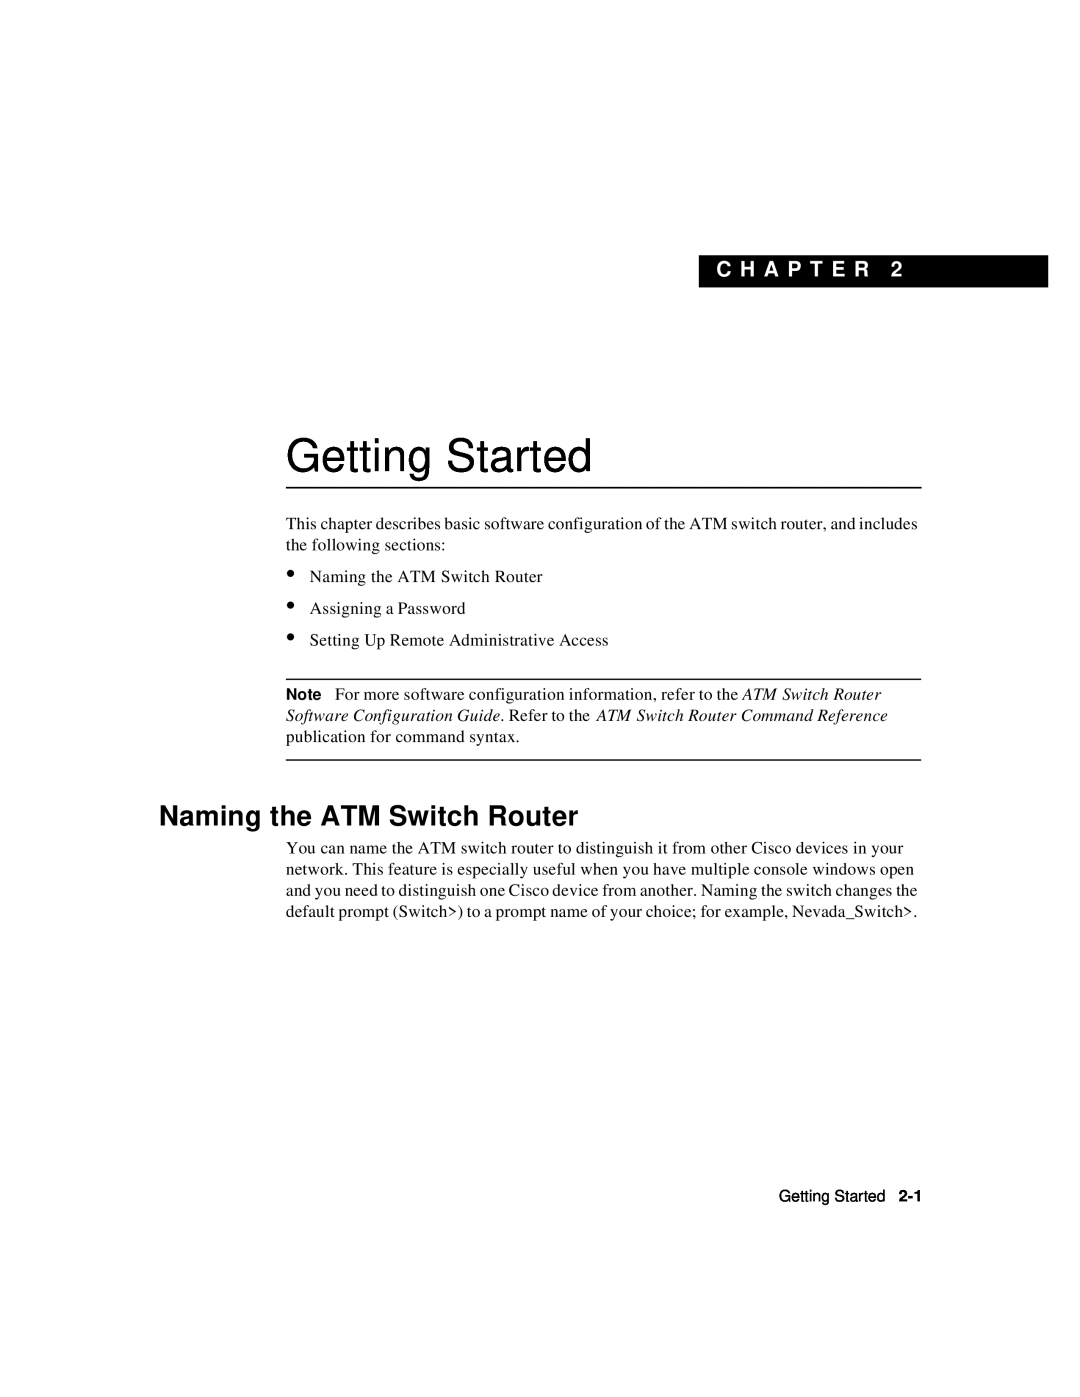 Cisco Systems 78-6897-01 manual Getting Started, Naming the ATM Switch Router, C H A P T E R 